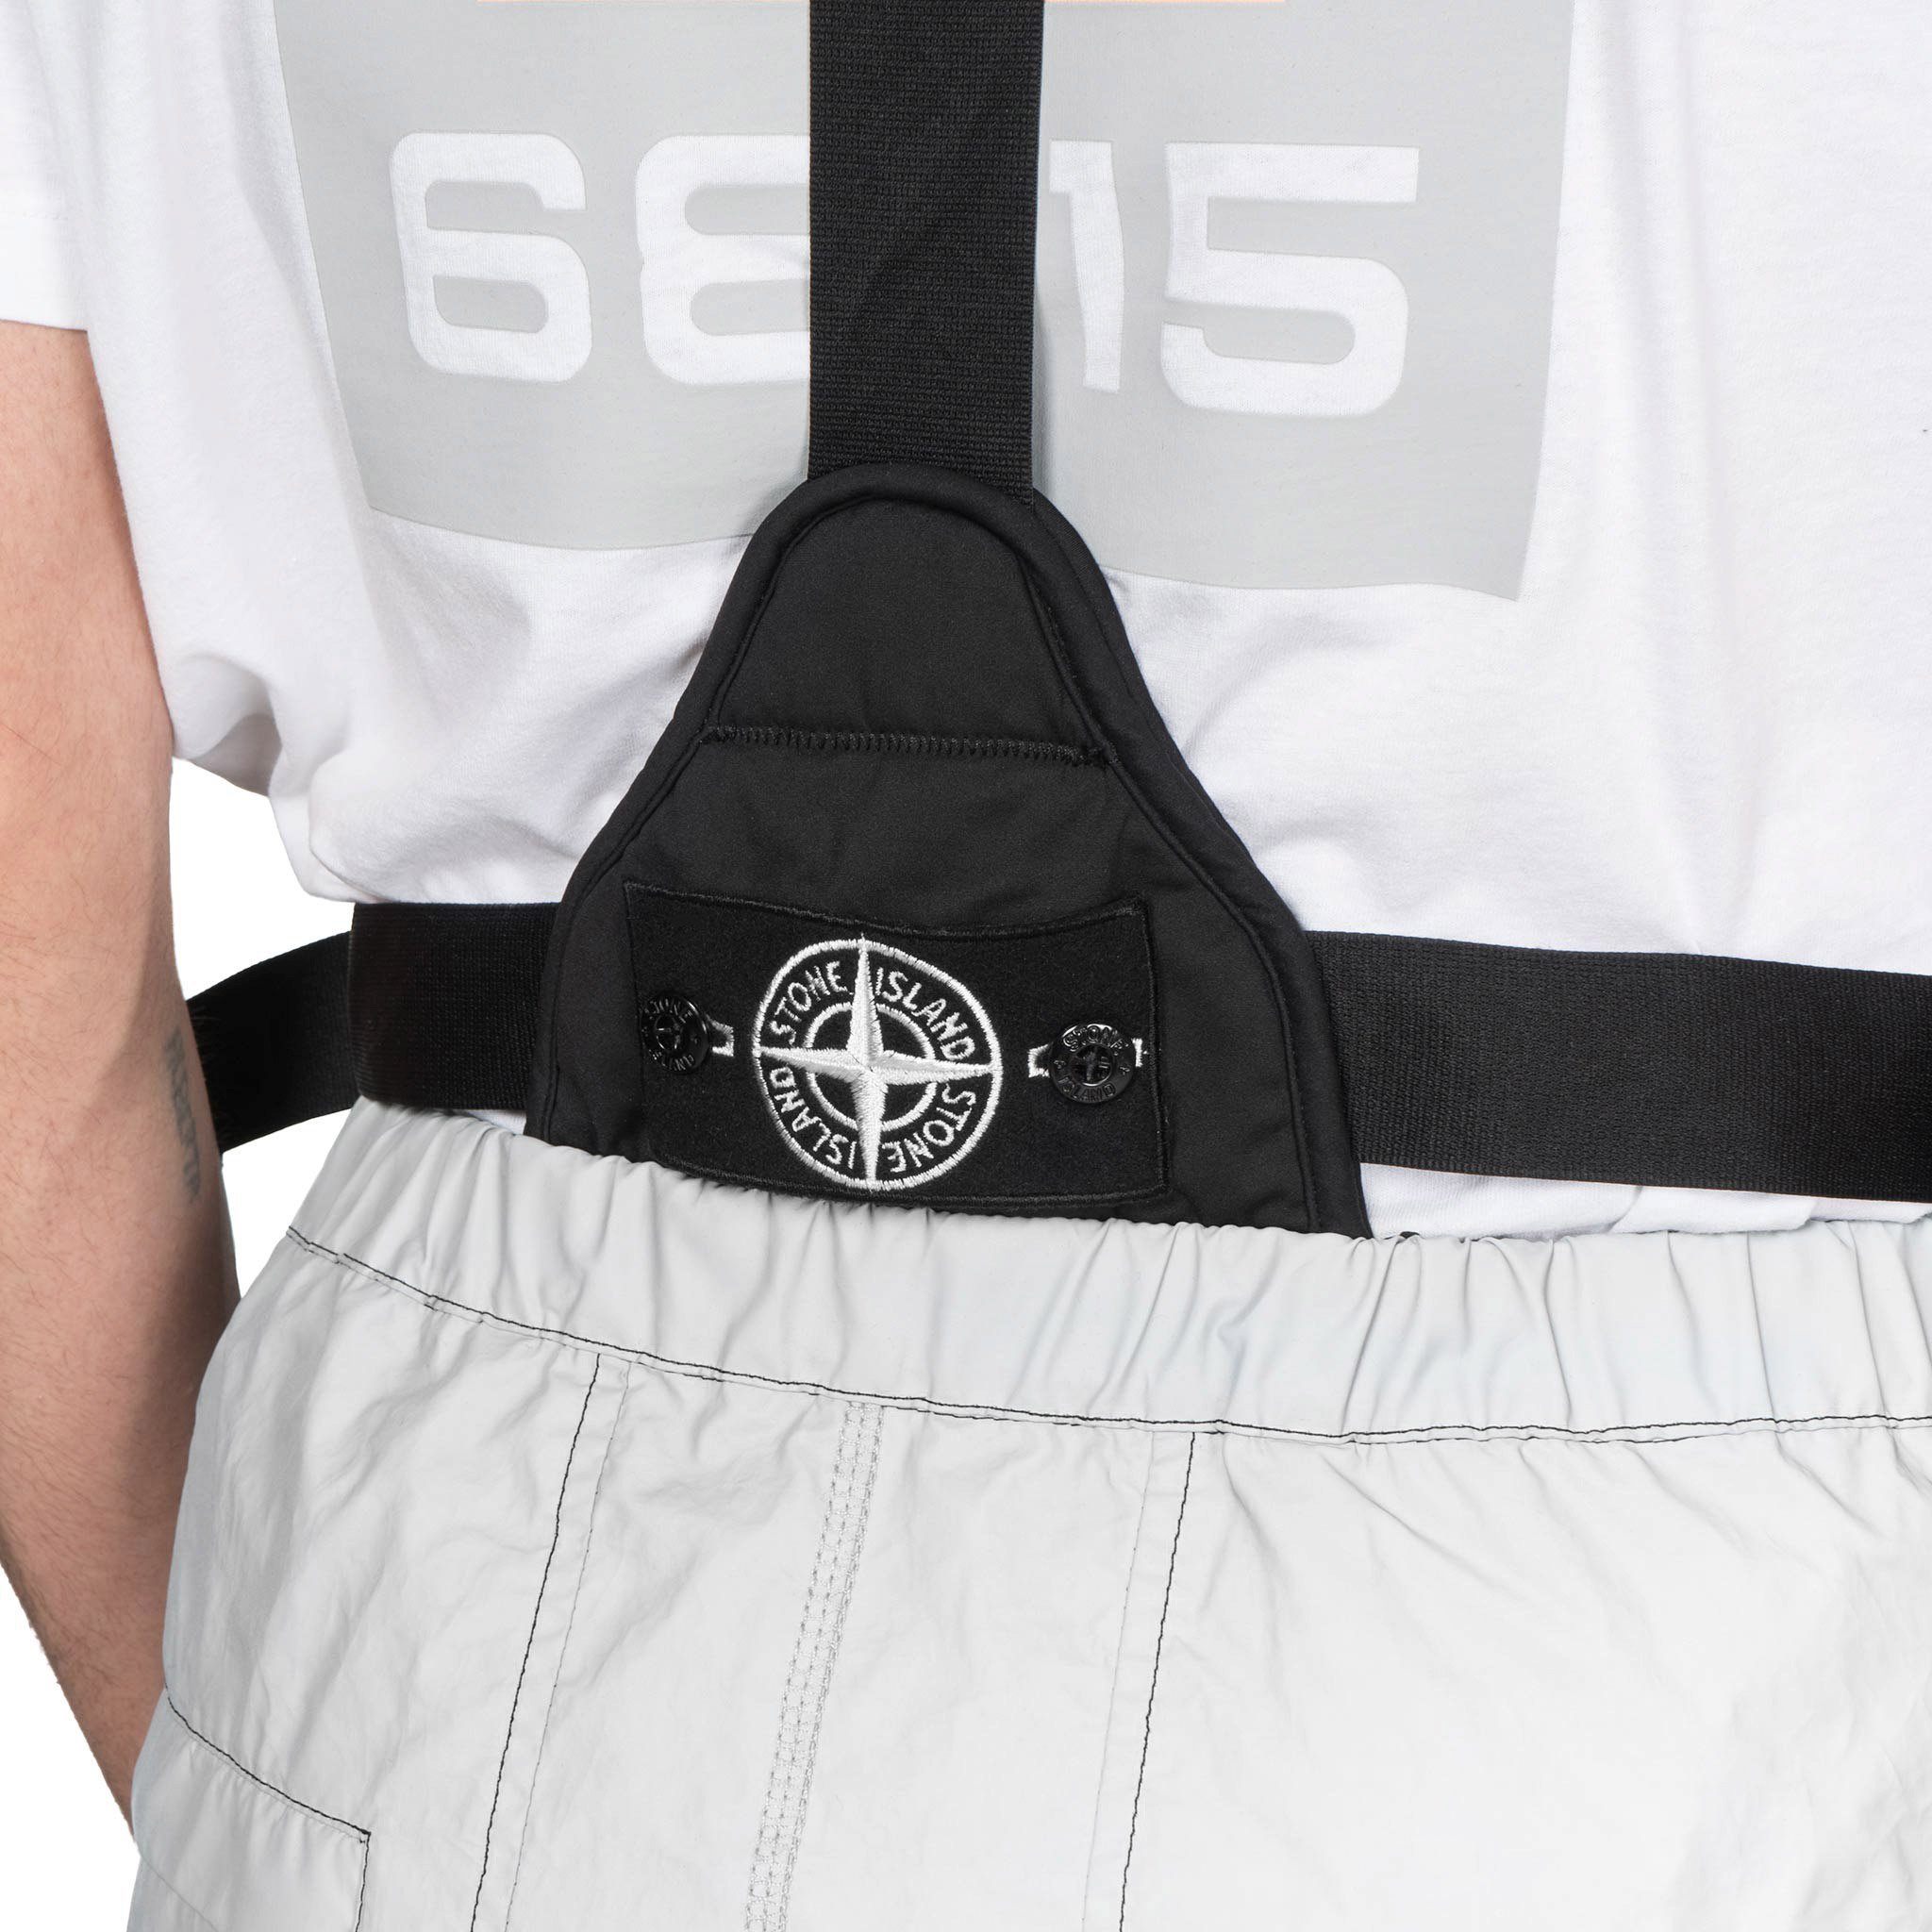 Stone Island Drops Reflective and Functional Utility Vest and Overalls